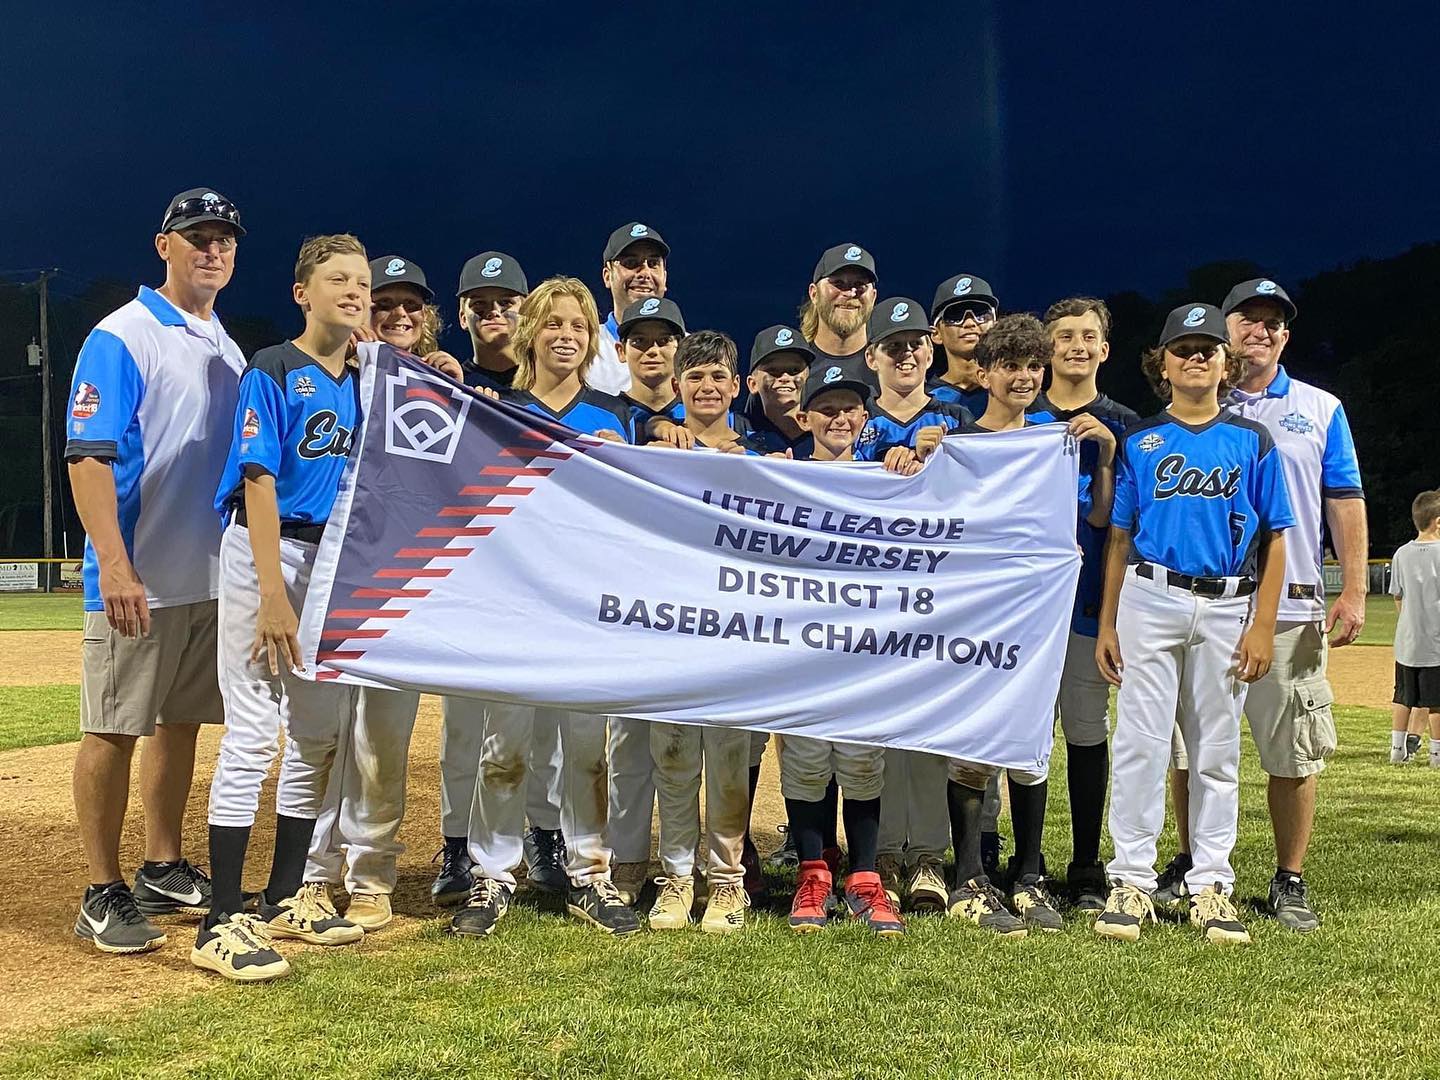 Toms-River-East-Little-League-for-winning-District-18-Championship